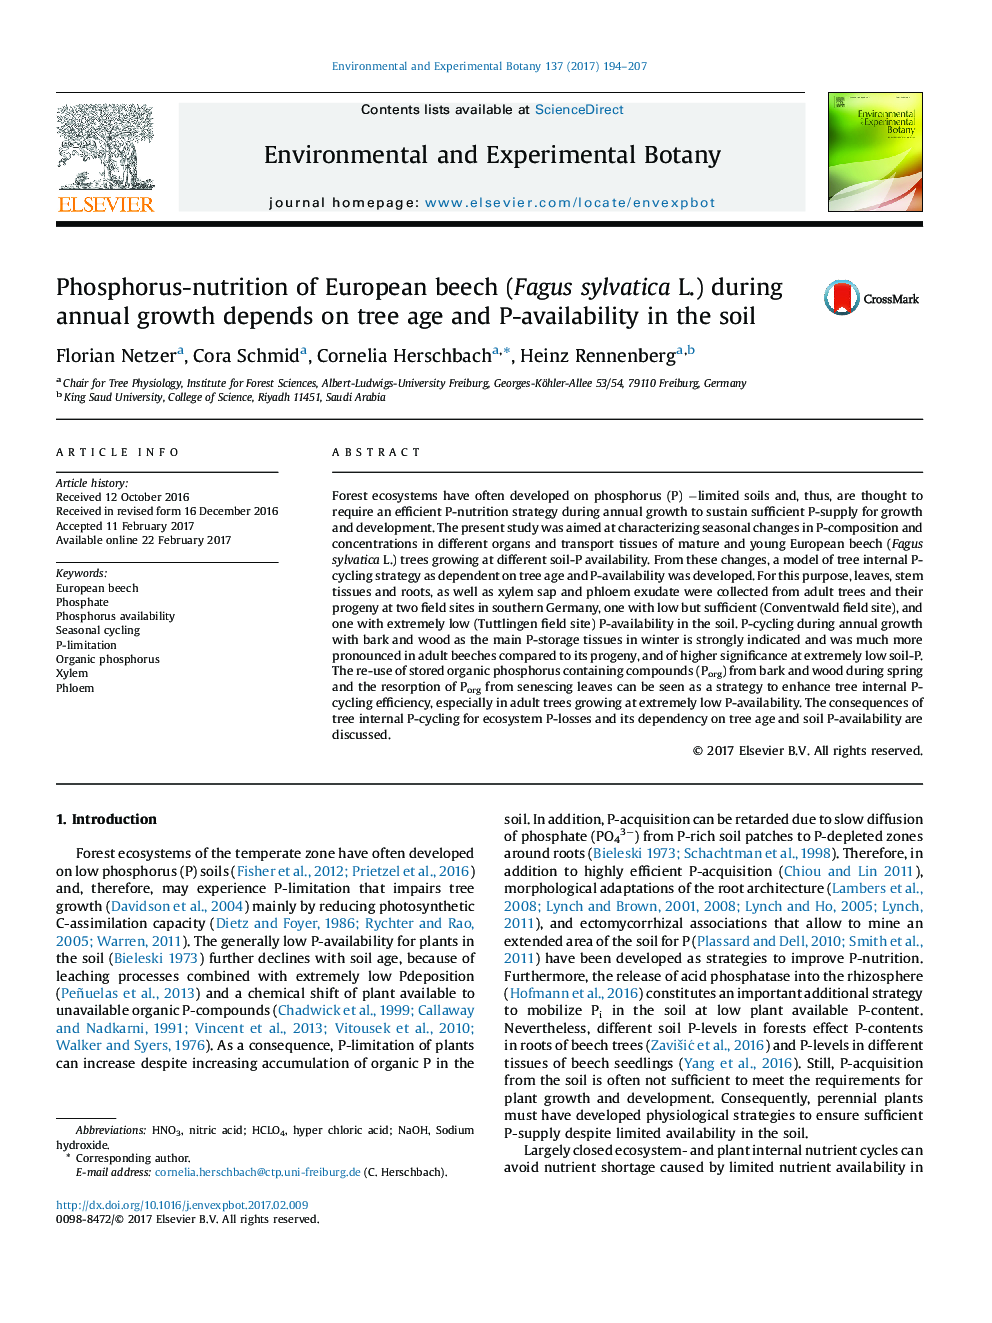 Phosphorus-nutrition of European beech (Fagus sylvatica L.) during annual growth depends on tree age and P-availability in the soil